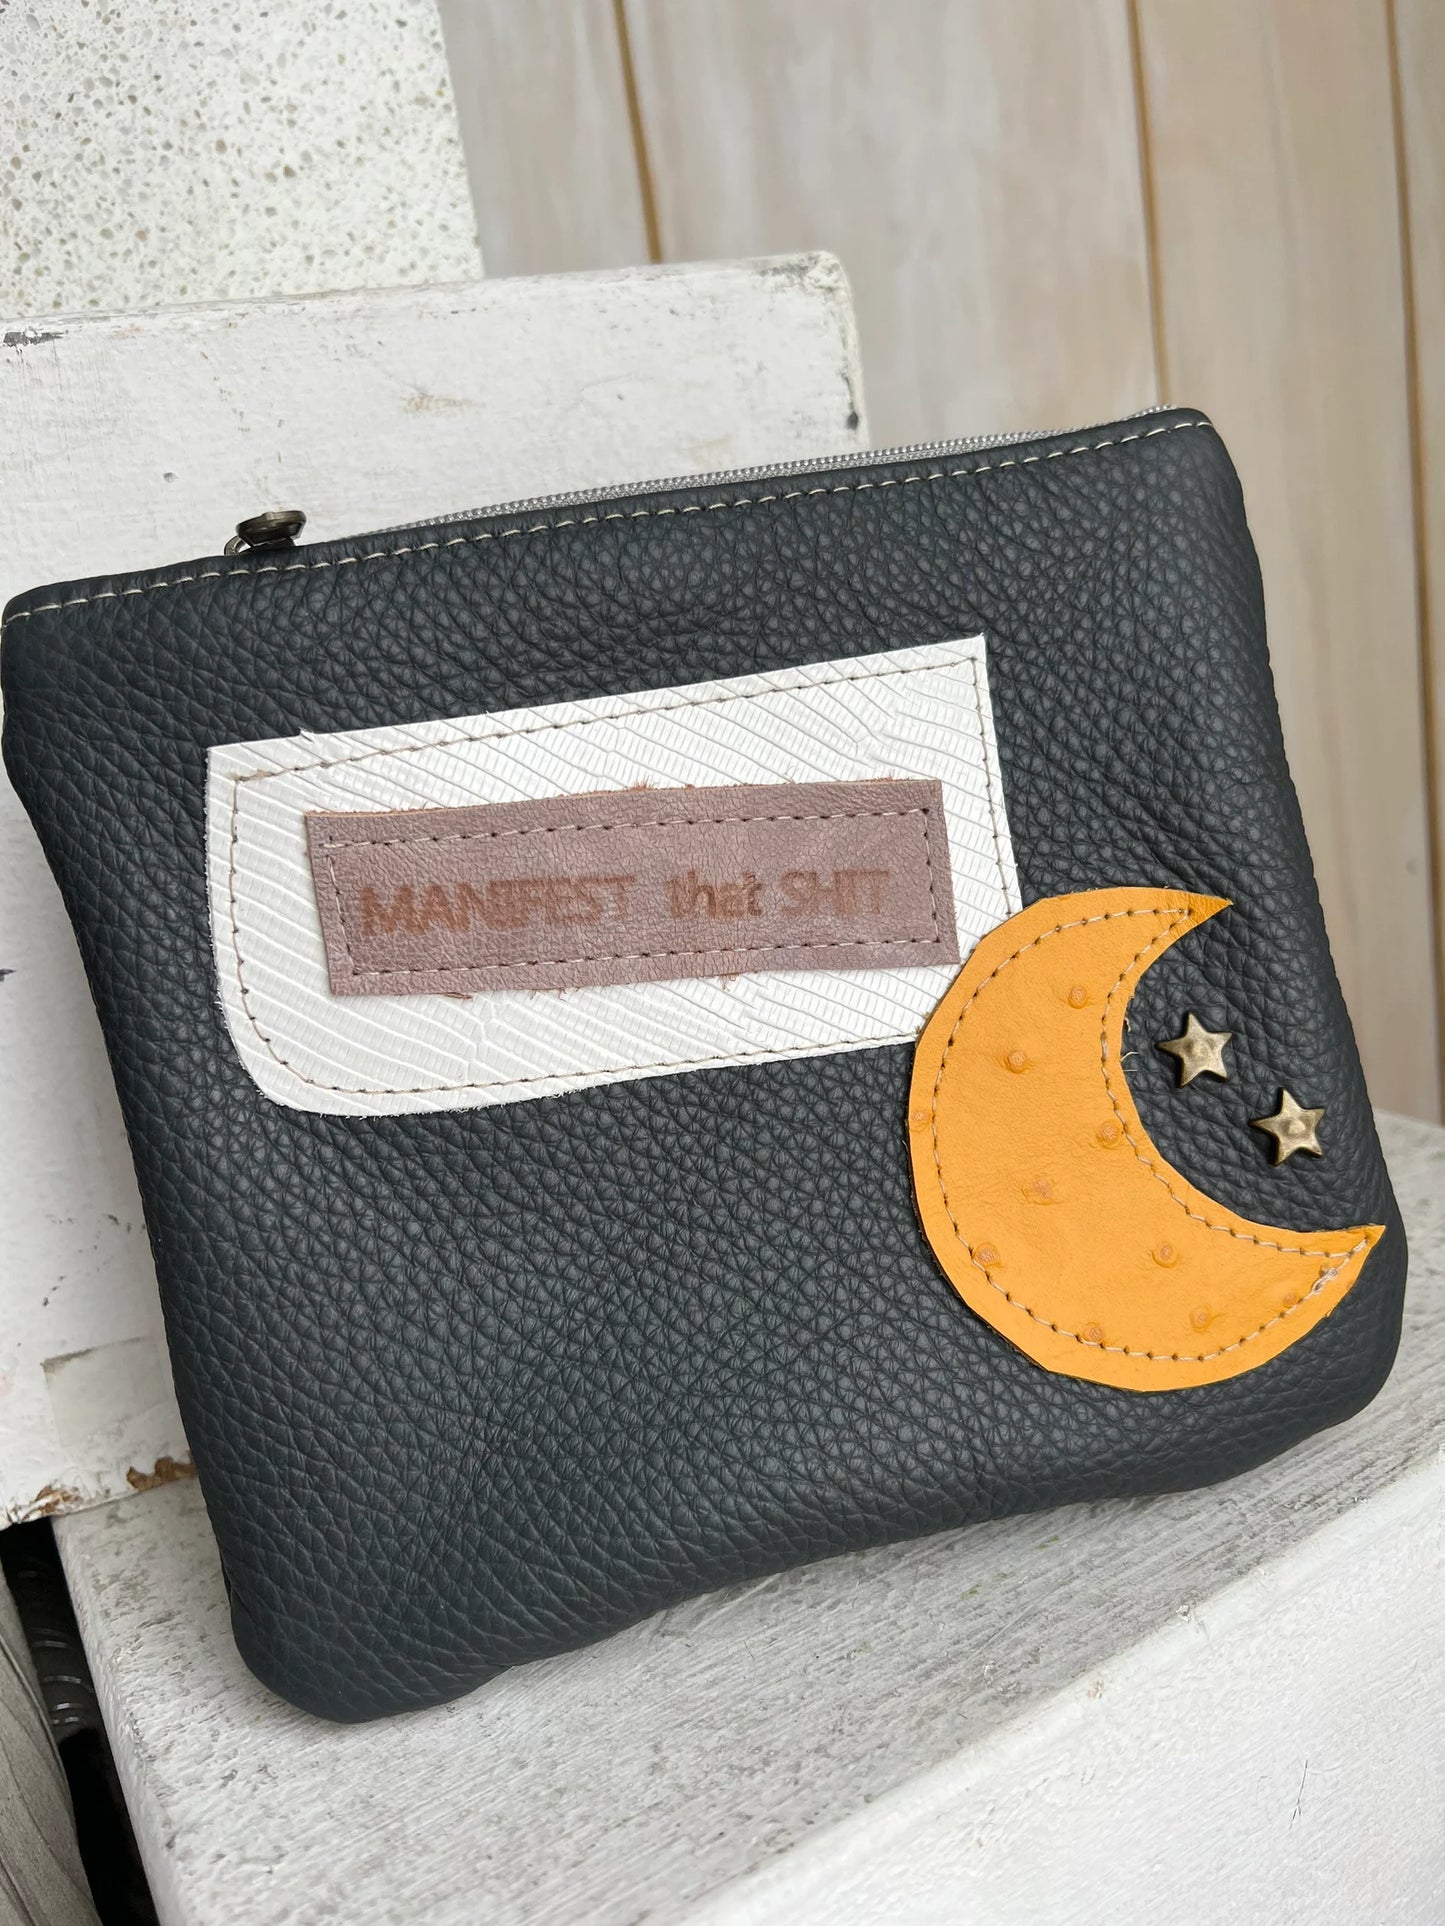 Manifest that shit moon stars leather pouch